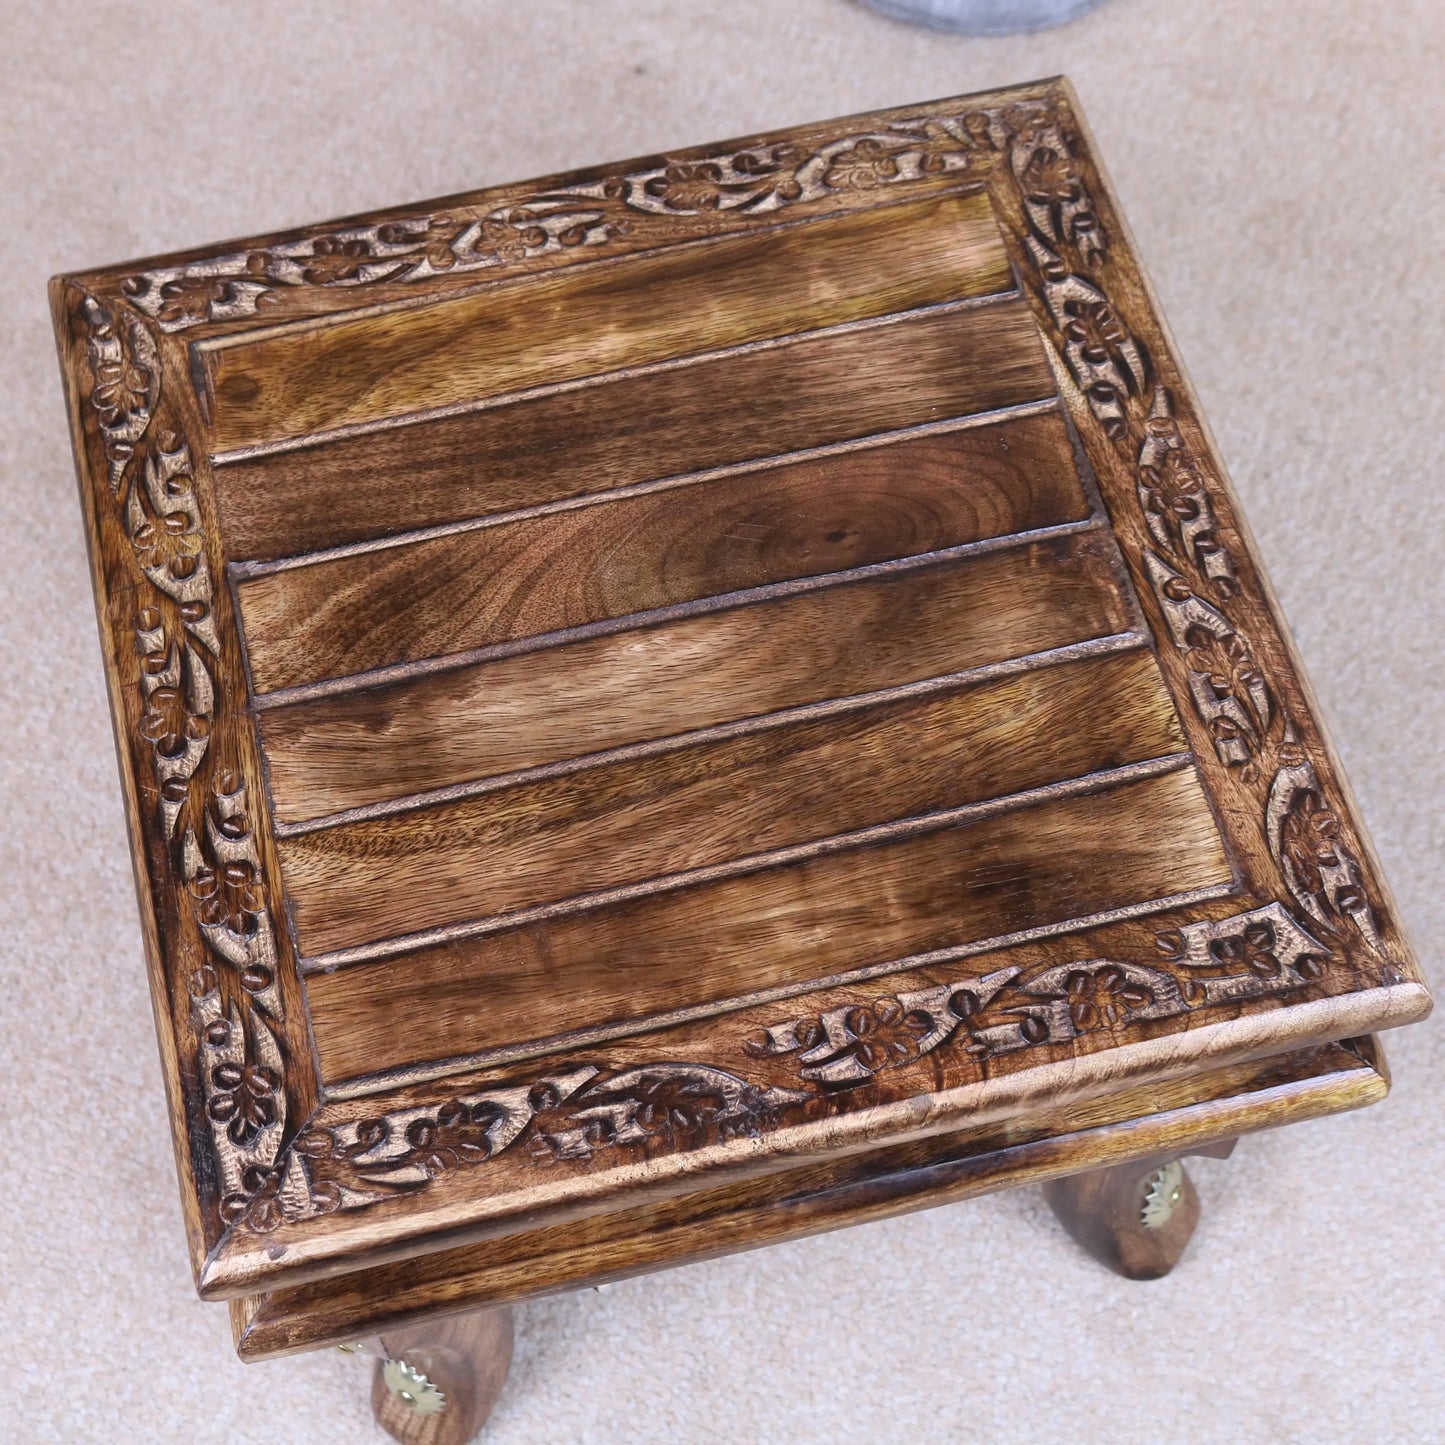 Pohar Small Wooden Footstool Top View